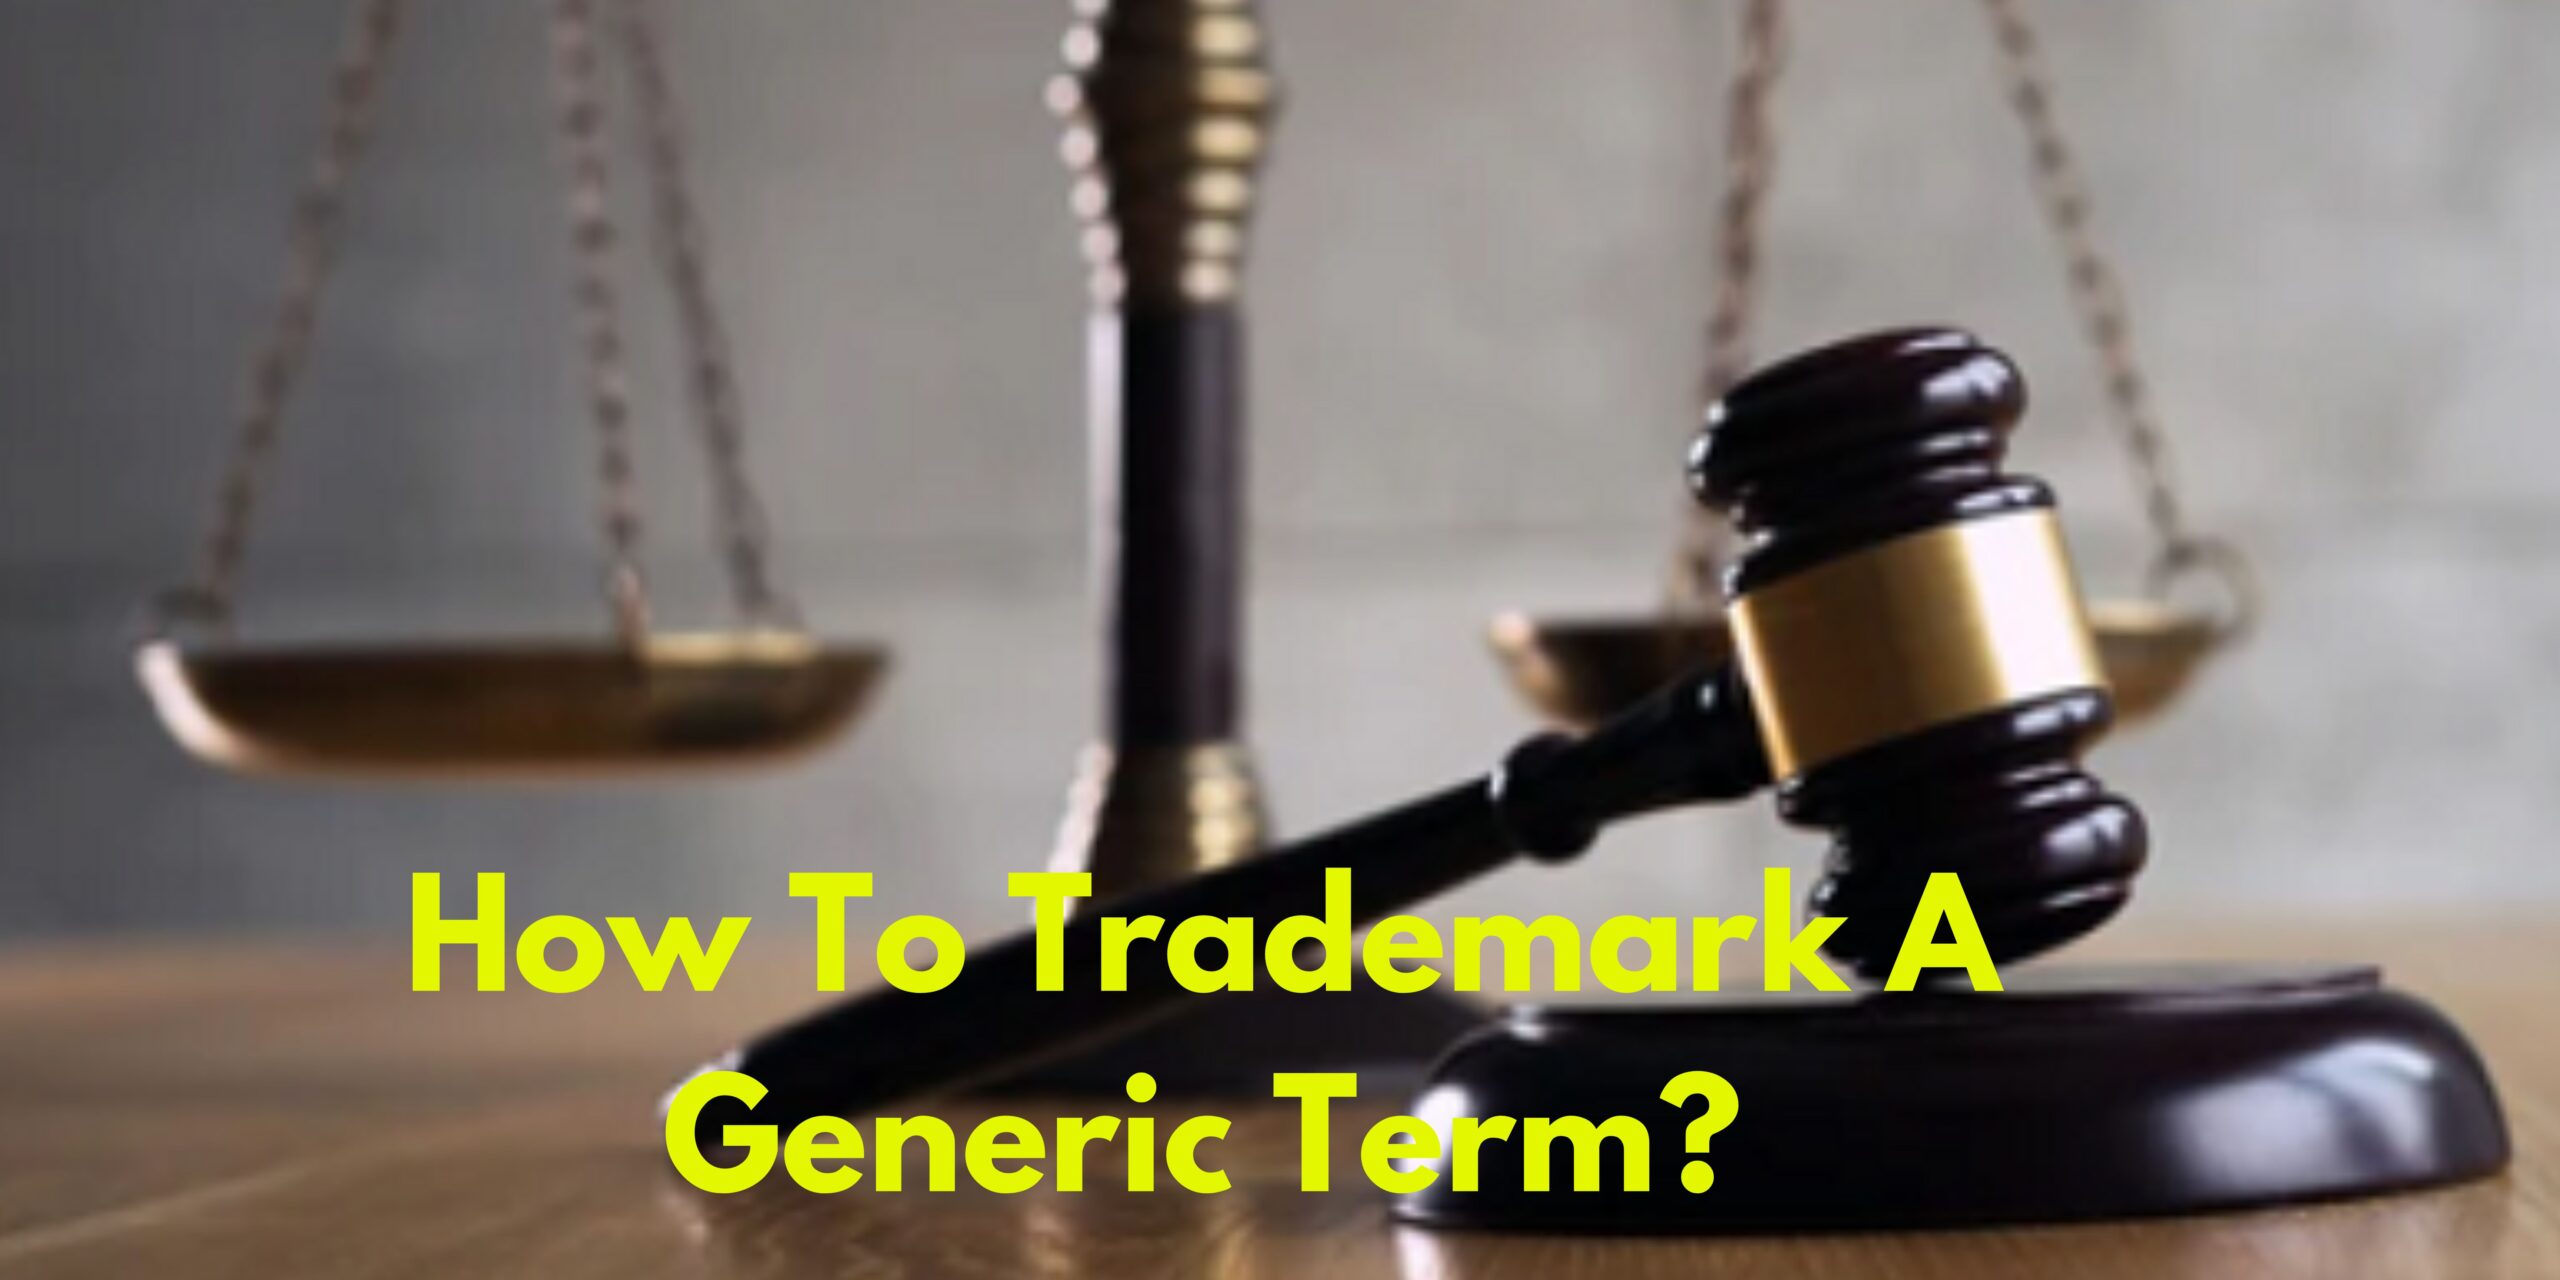 How To Trademark A Generic Term?